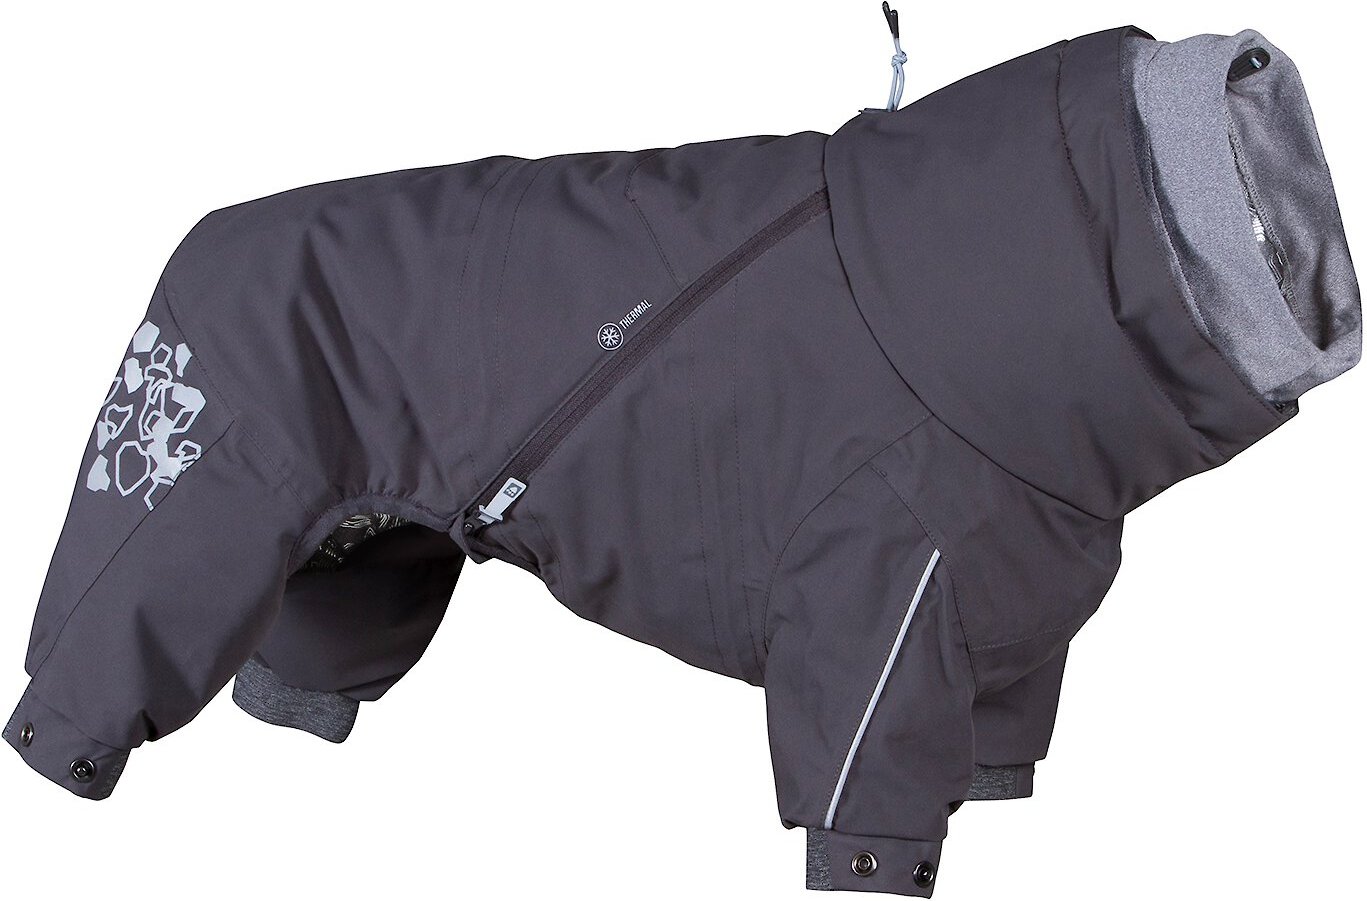 Hurtta Extreme Overall Insulated Dog Snowsuit, Blackberry